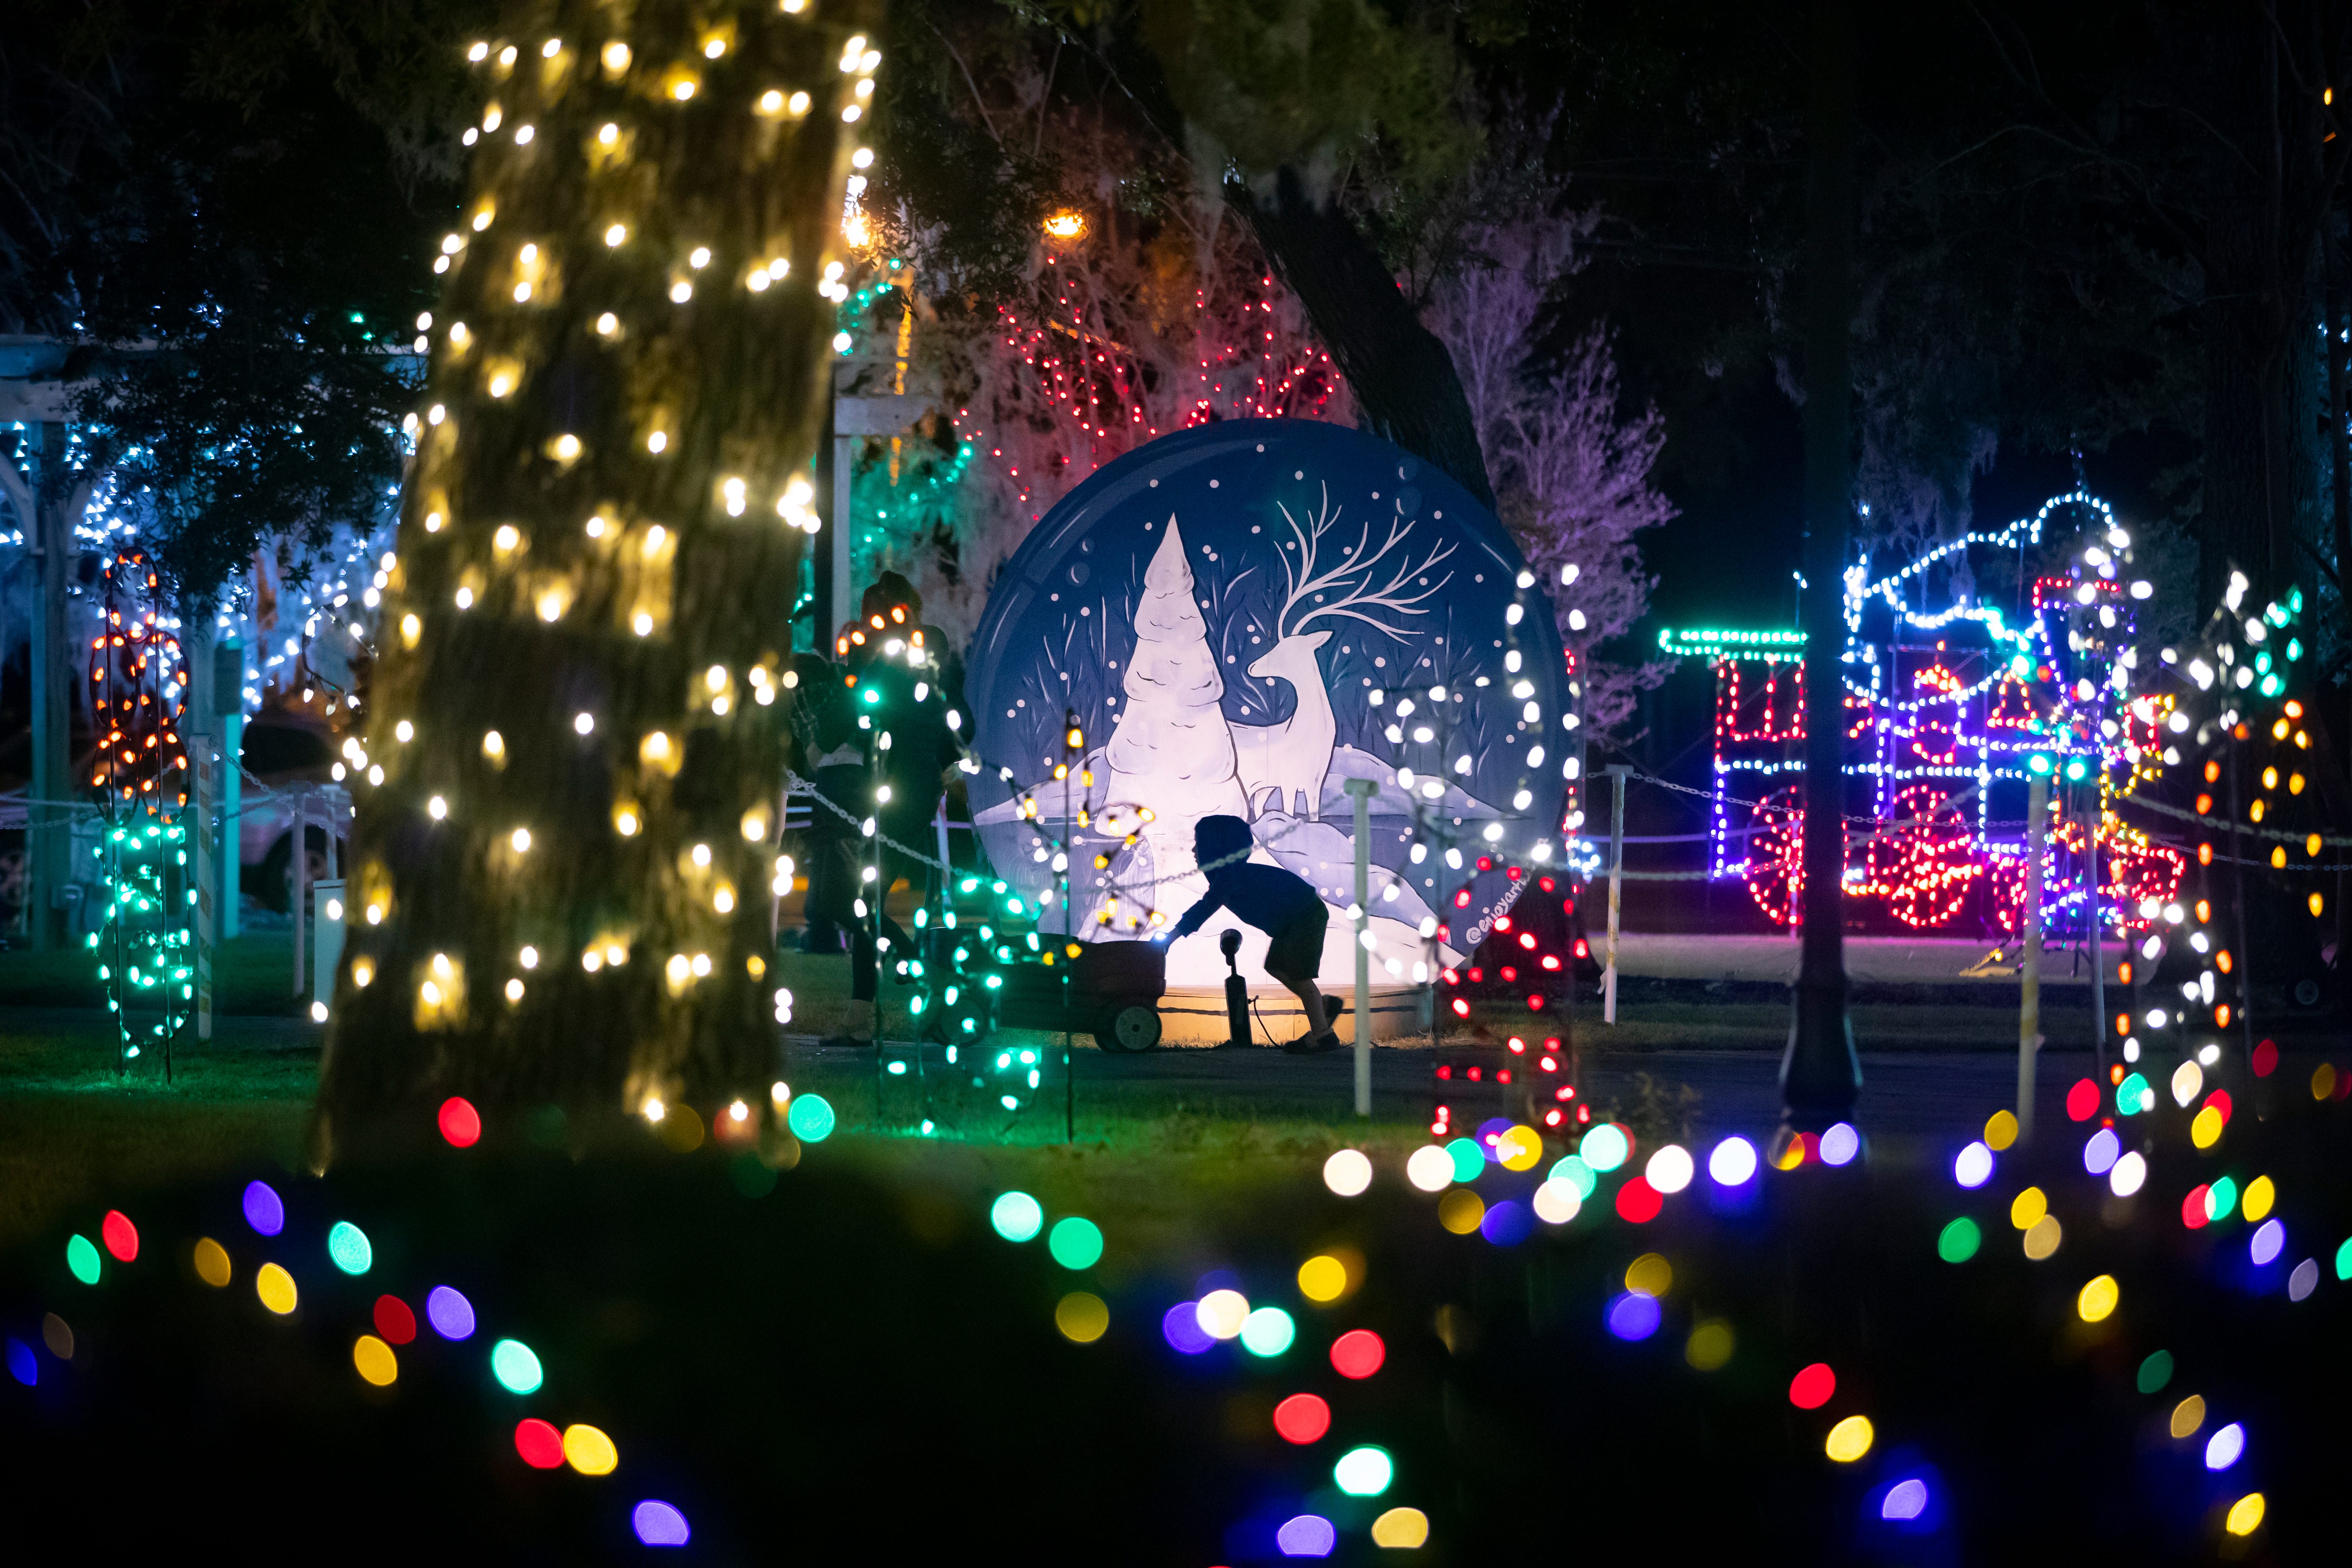 There's still time to check out these Christmas light shows in Bay County